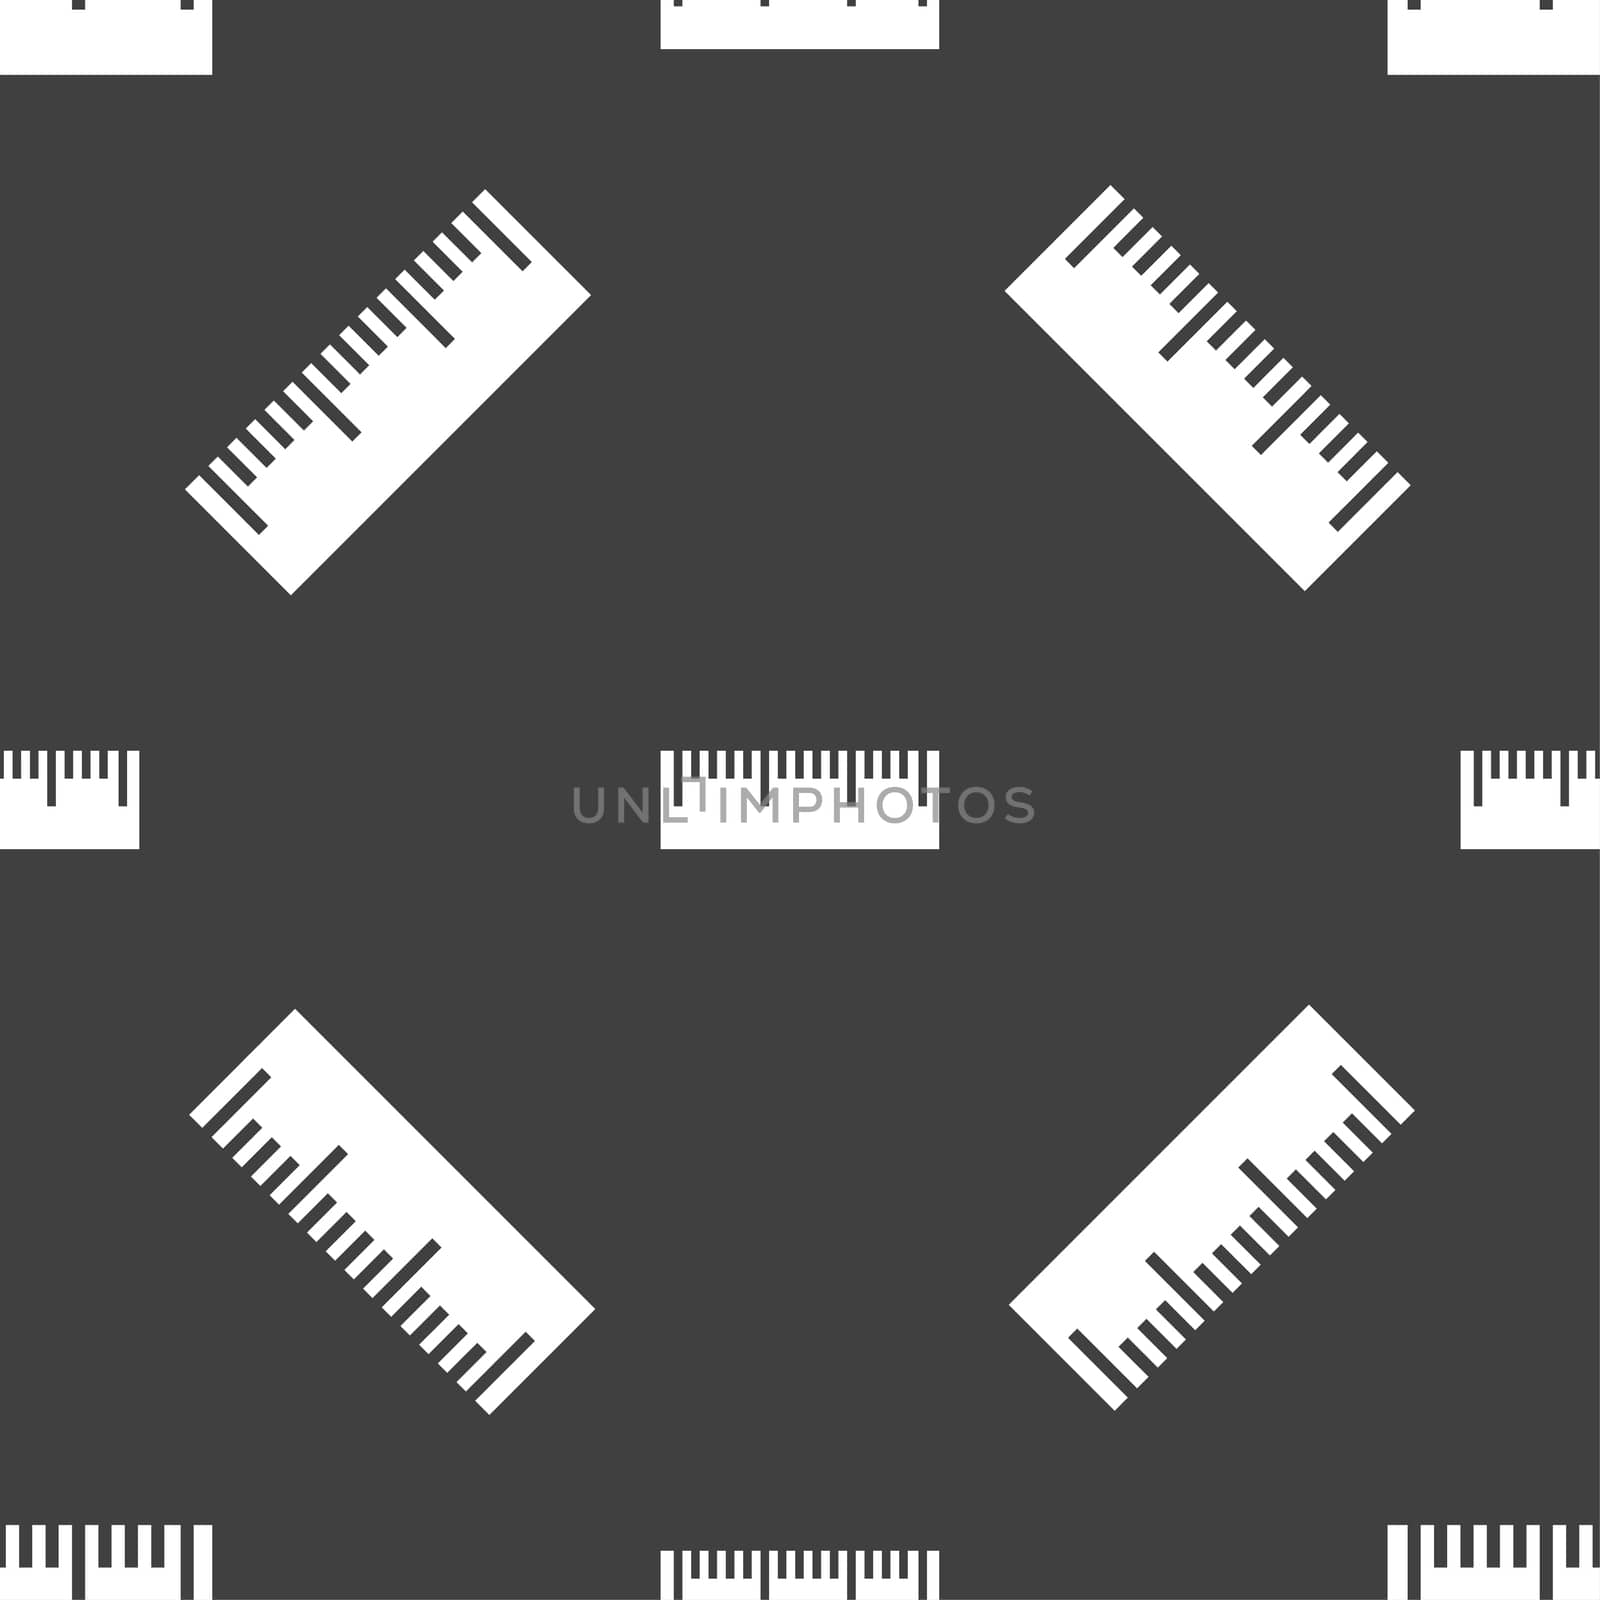 Ruler sign icon. School tool symbol. Seamless pattern on a gray background. illustration